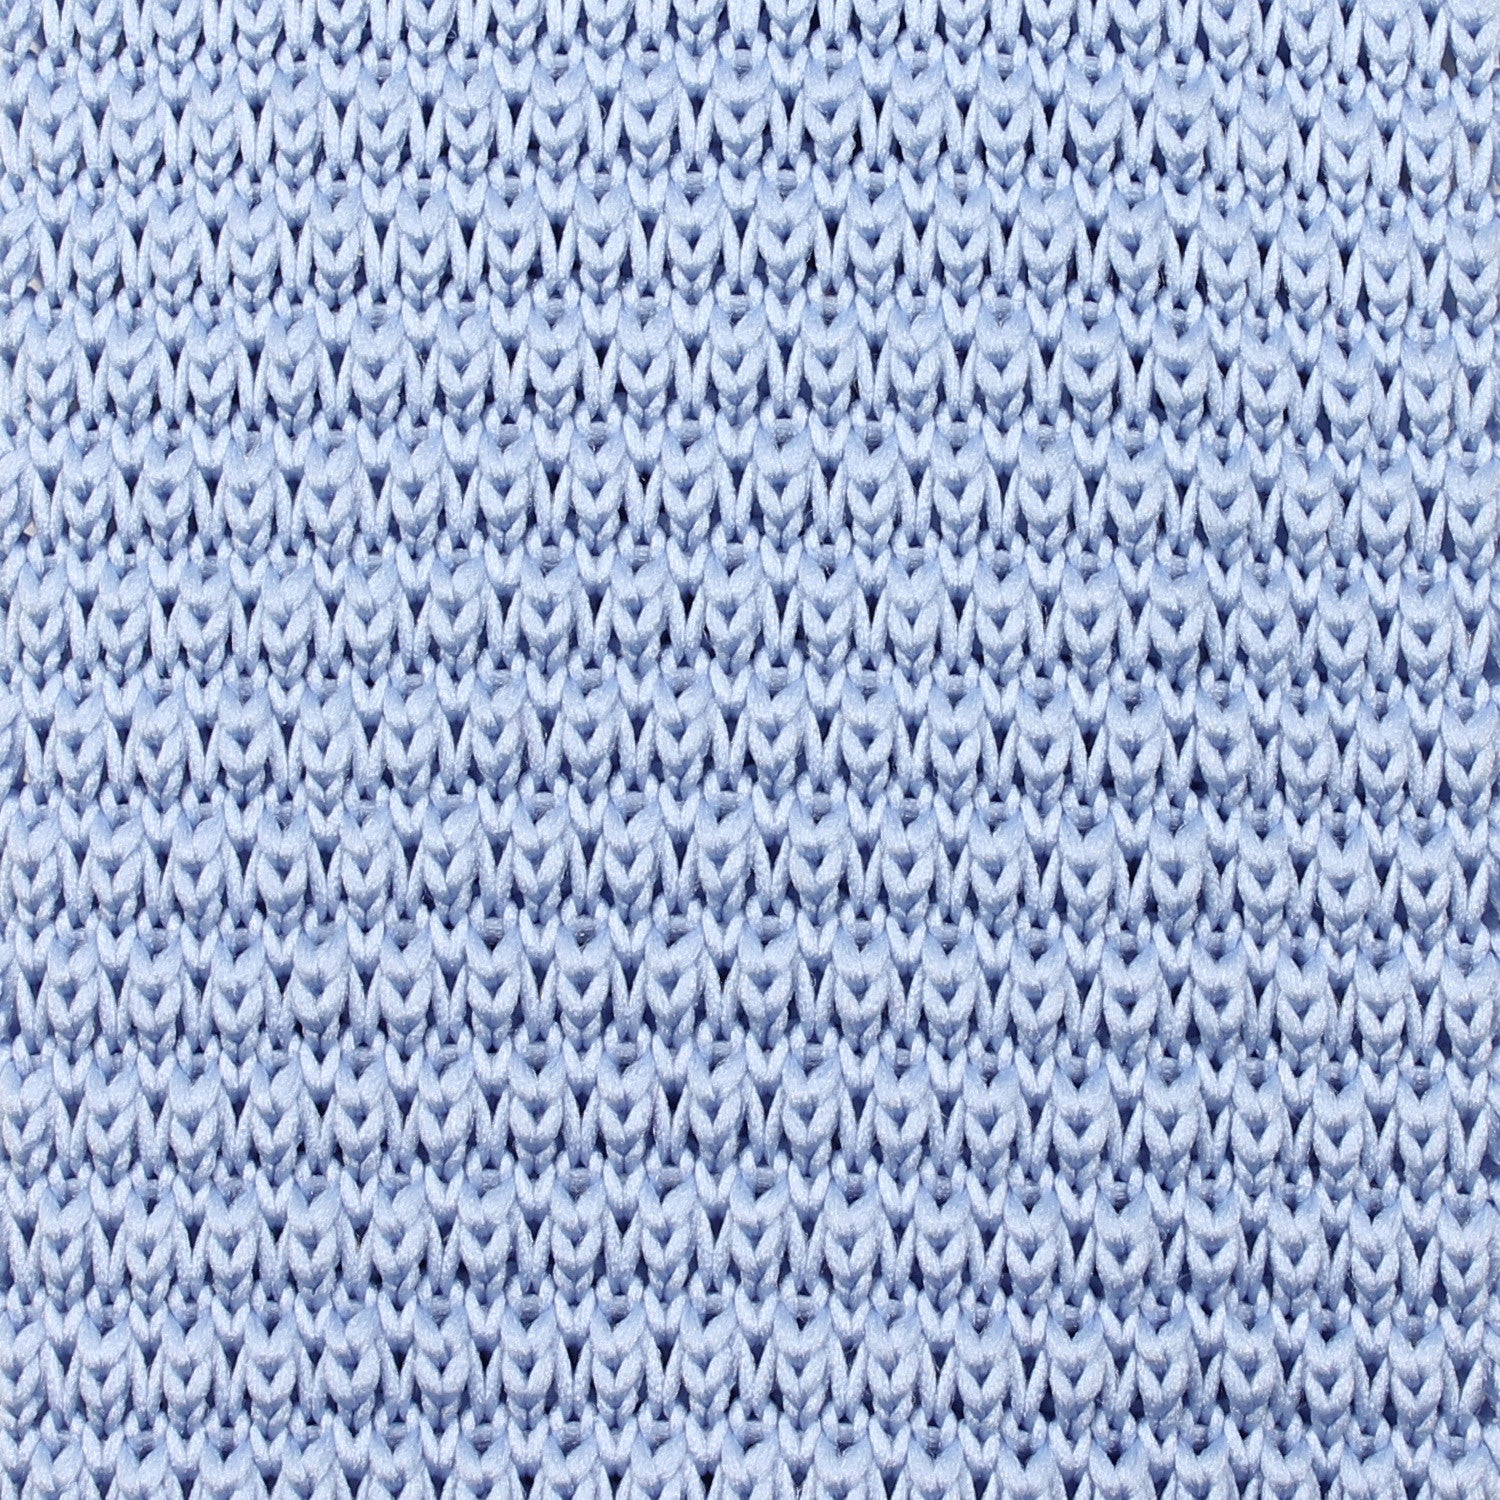 Columbia Light Blue Knitted Tie Detail View